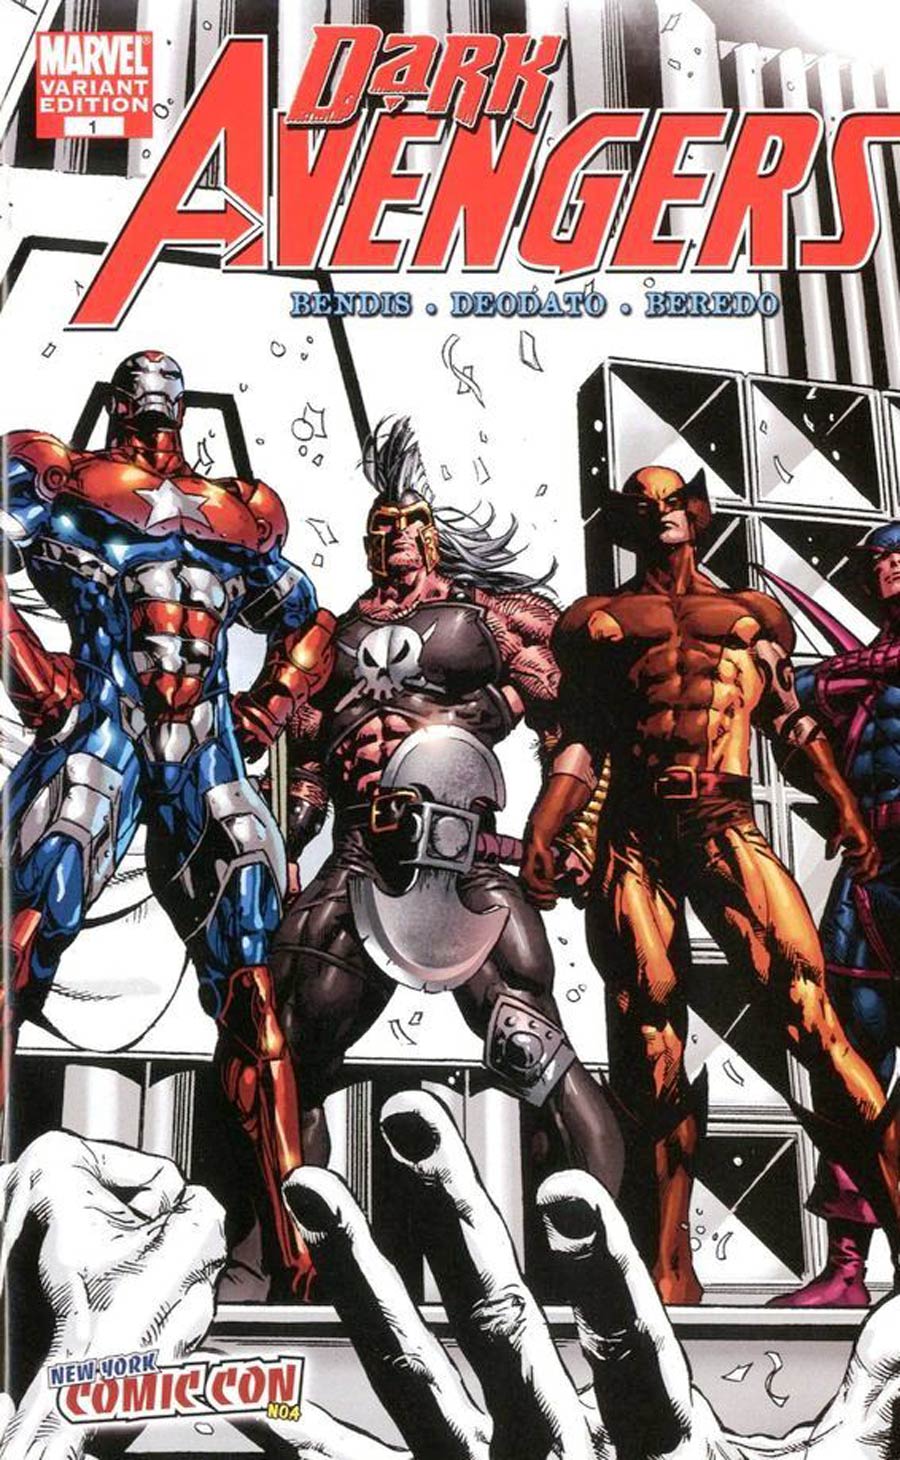 Dark Avengers #1 Cover I NYCC Exclusive Variant Cover (Dark Reign Tie-In)